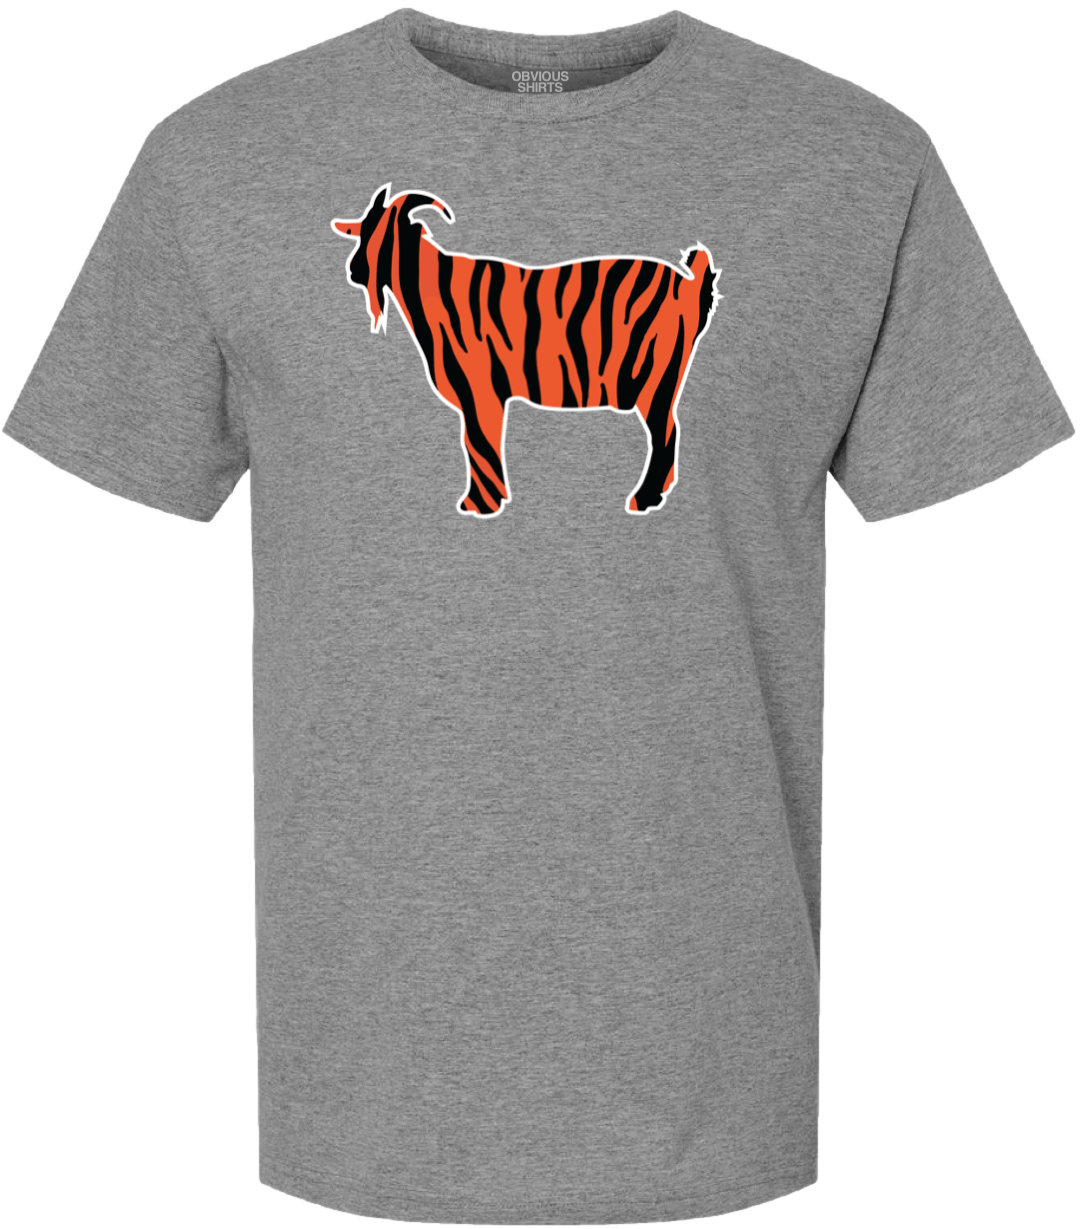 THE TIGER GOAT. (HEATHER GREY) - OBVIOUS SHIRTS